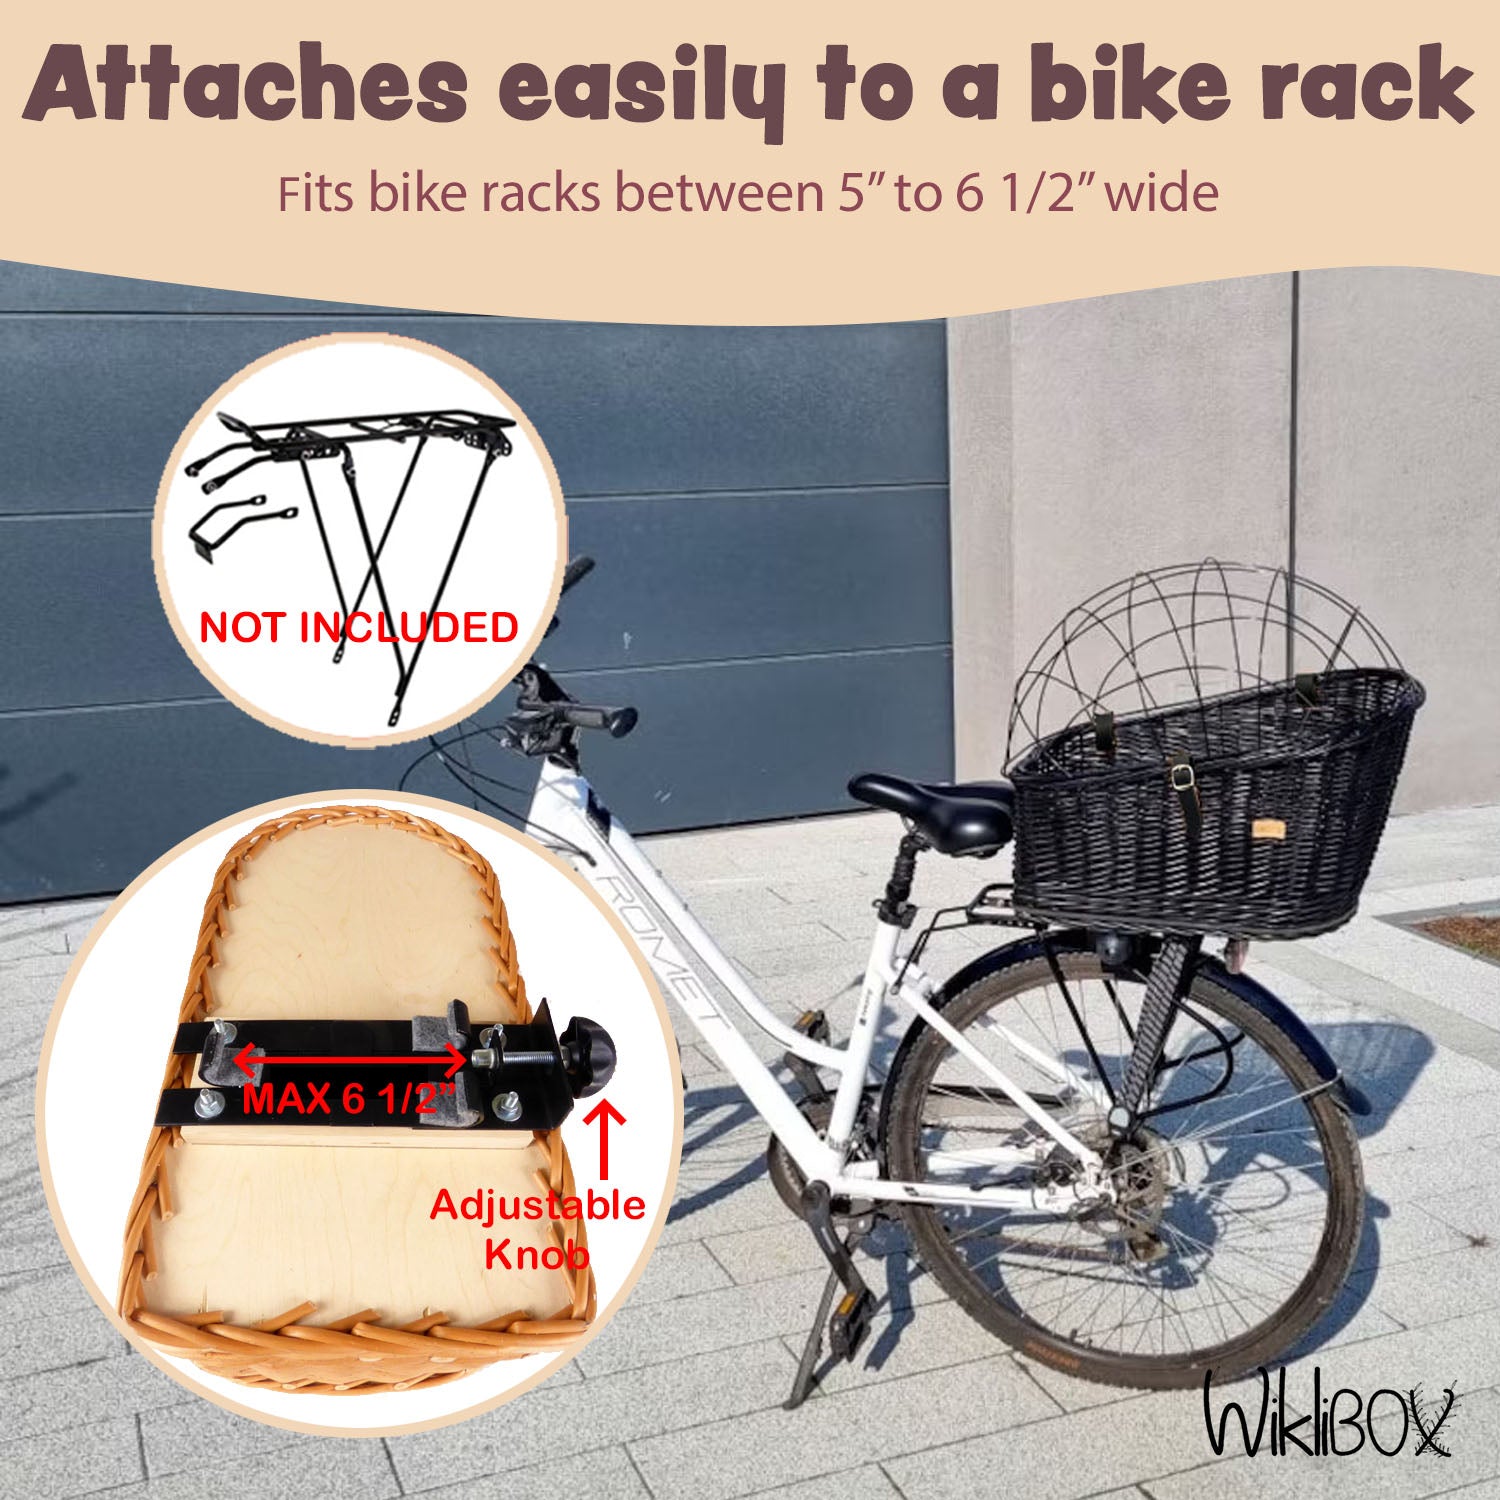 Wicker Dog or Cat Carrier with Protective Grille - for Bicycle Luggage Rack & Metal Holder - Black Color with Soft Cotton Cushion